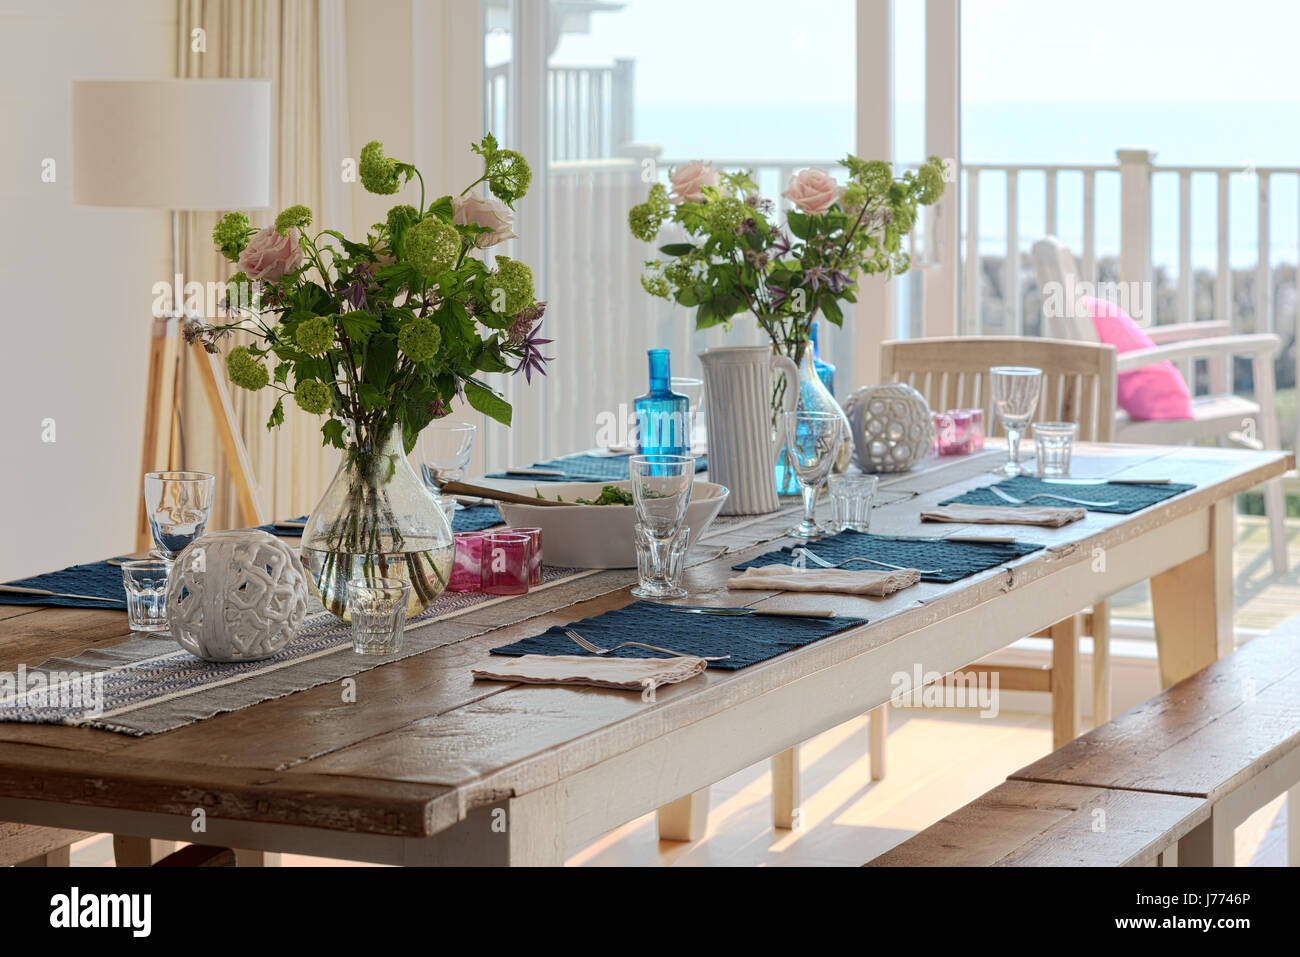 Lunch laid on wooden farm house table in kitchen diner with balcony views out to the sea Stock Photo